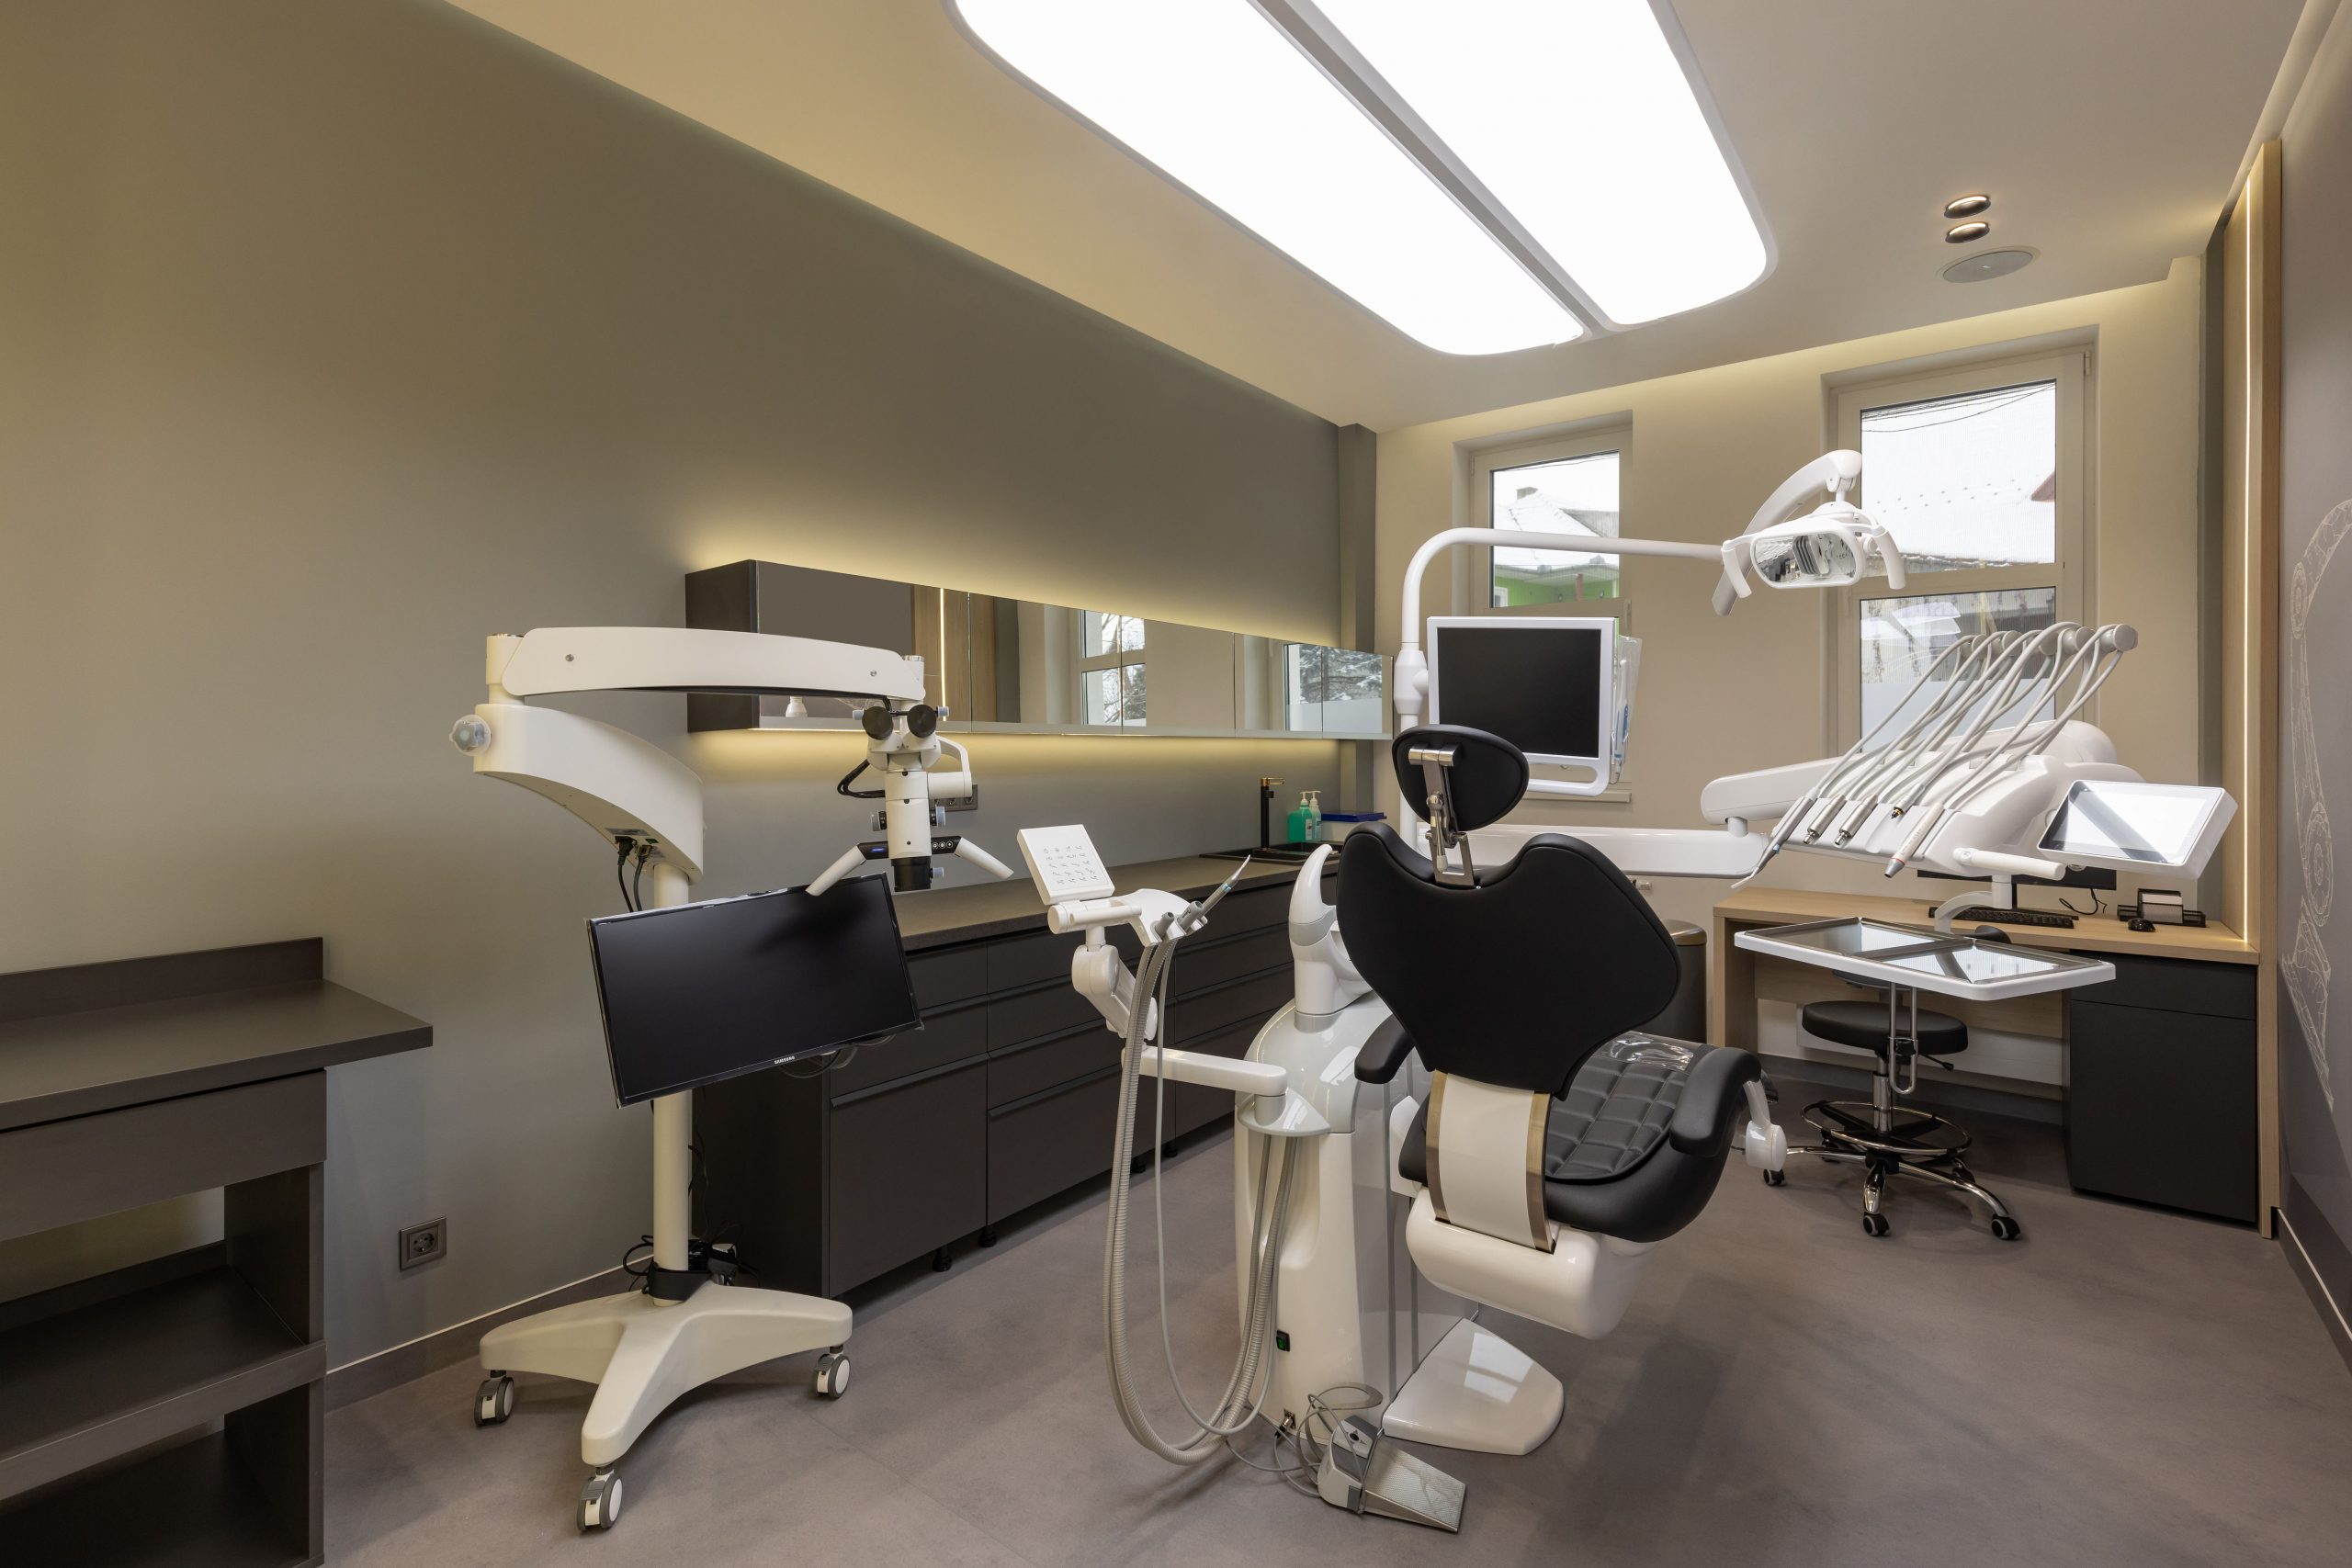 A Guide to Build a Dental Clinic